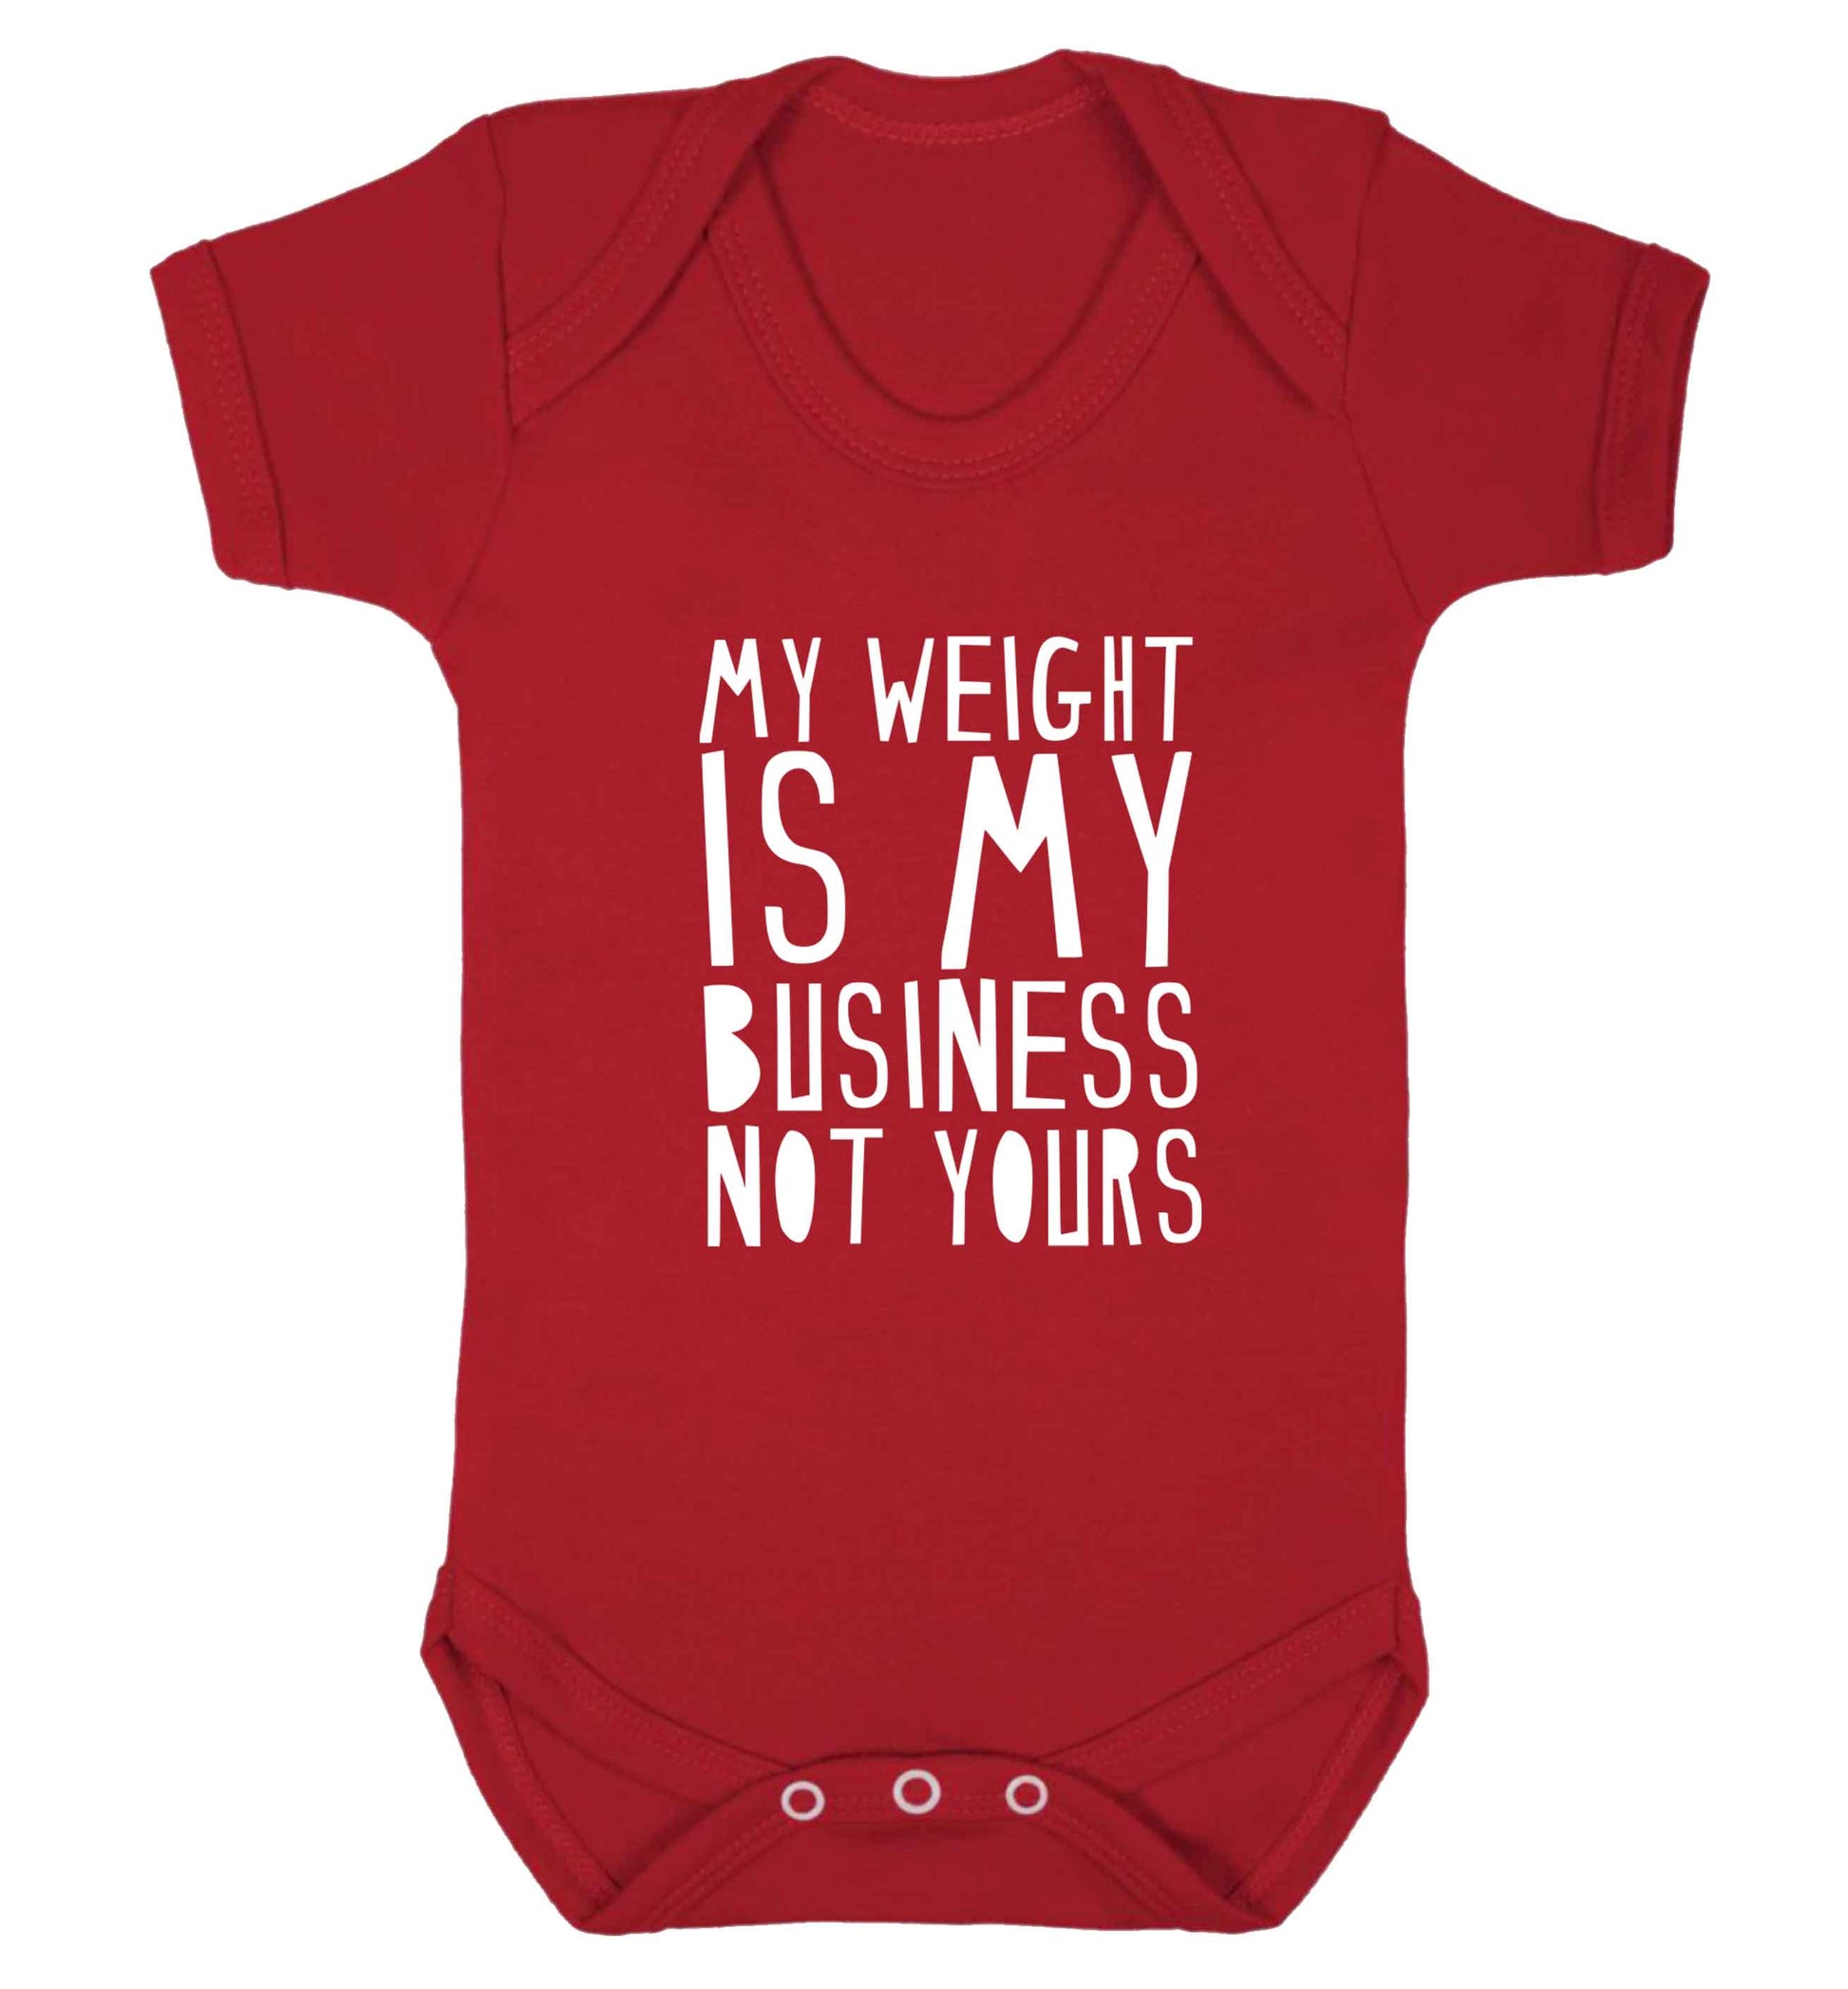 My weight is my business not yours baby vest red 18-24 months